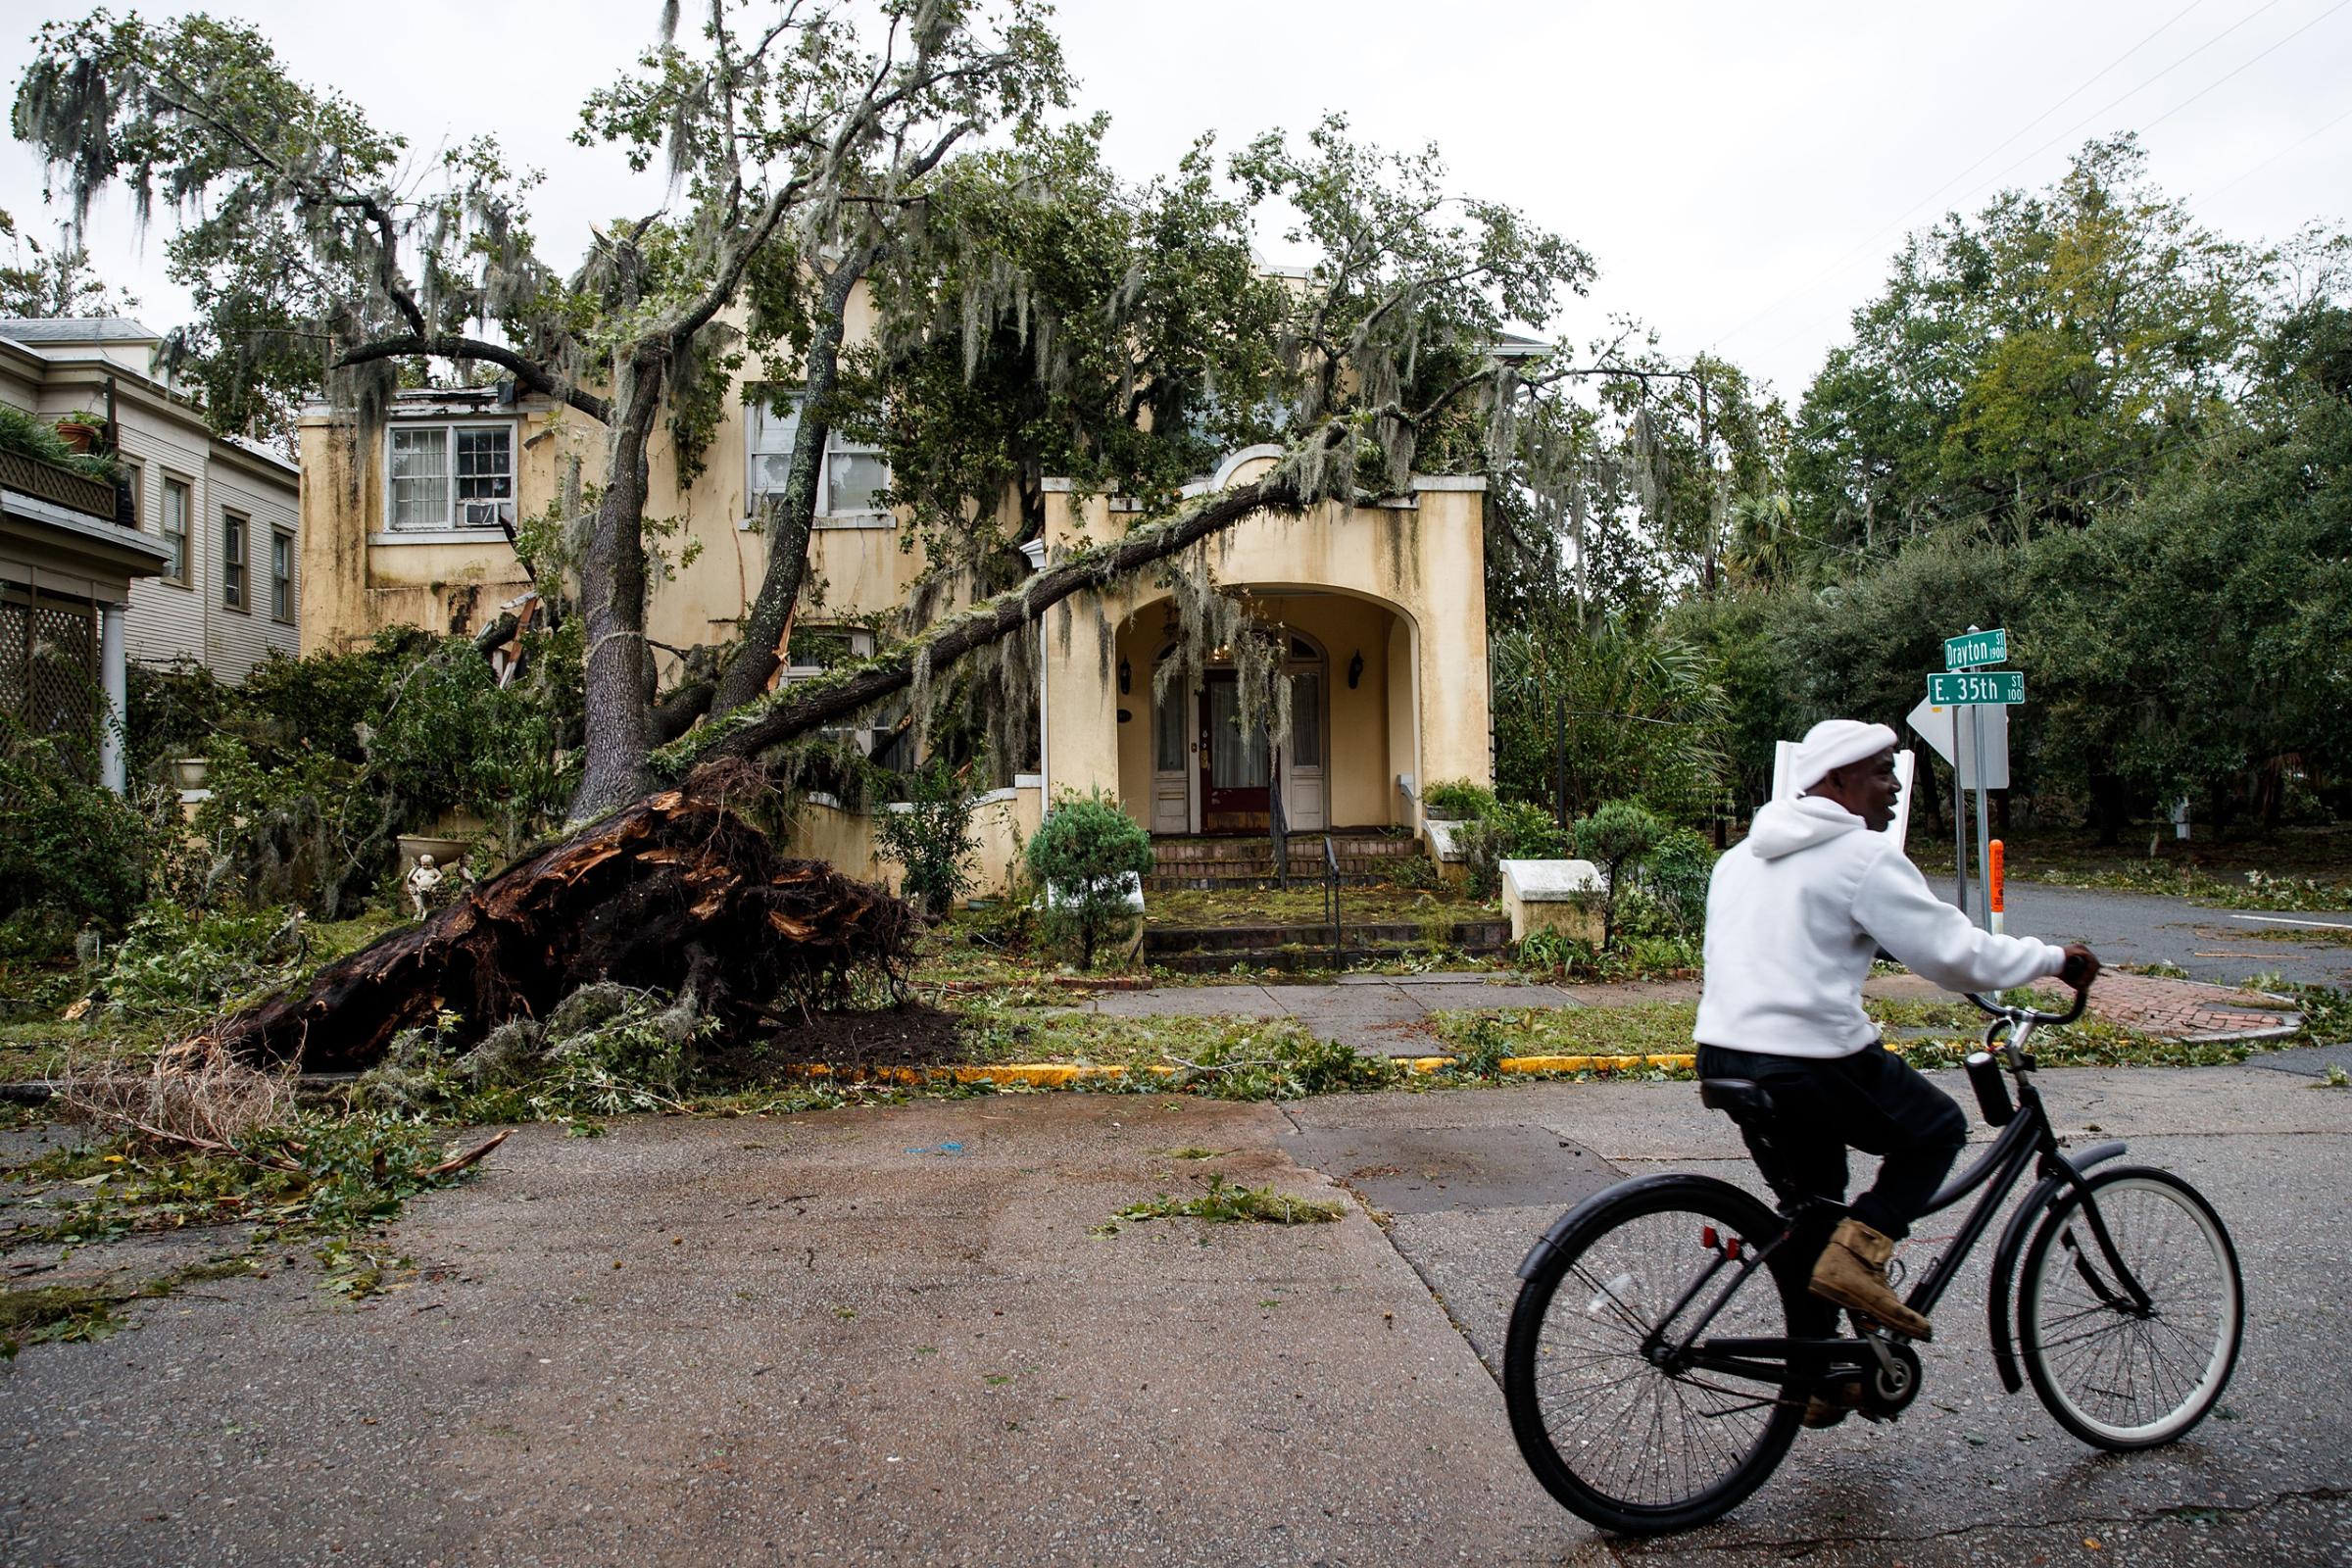 SAVANNAH, GA - OCTOBER 8: A downed tree from Hurricane Matthew rests against a home, October 8, 2016 in Savannah, Georgia. Across the Southeast, Over 1.4 million people have lost power due to Hurricane Matthew which has been downgraded to a category 1 hurricane on Saturday morning. (Photo by Drew Angerer/Getty Images)